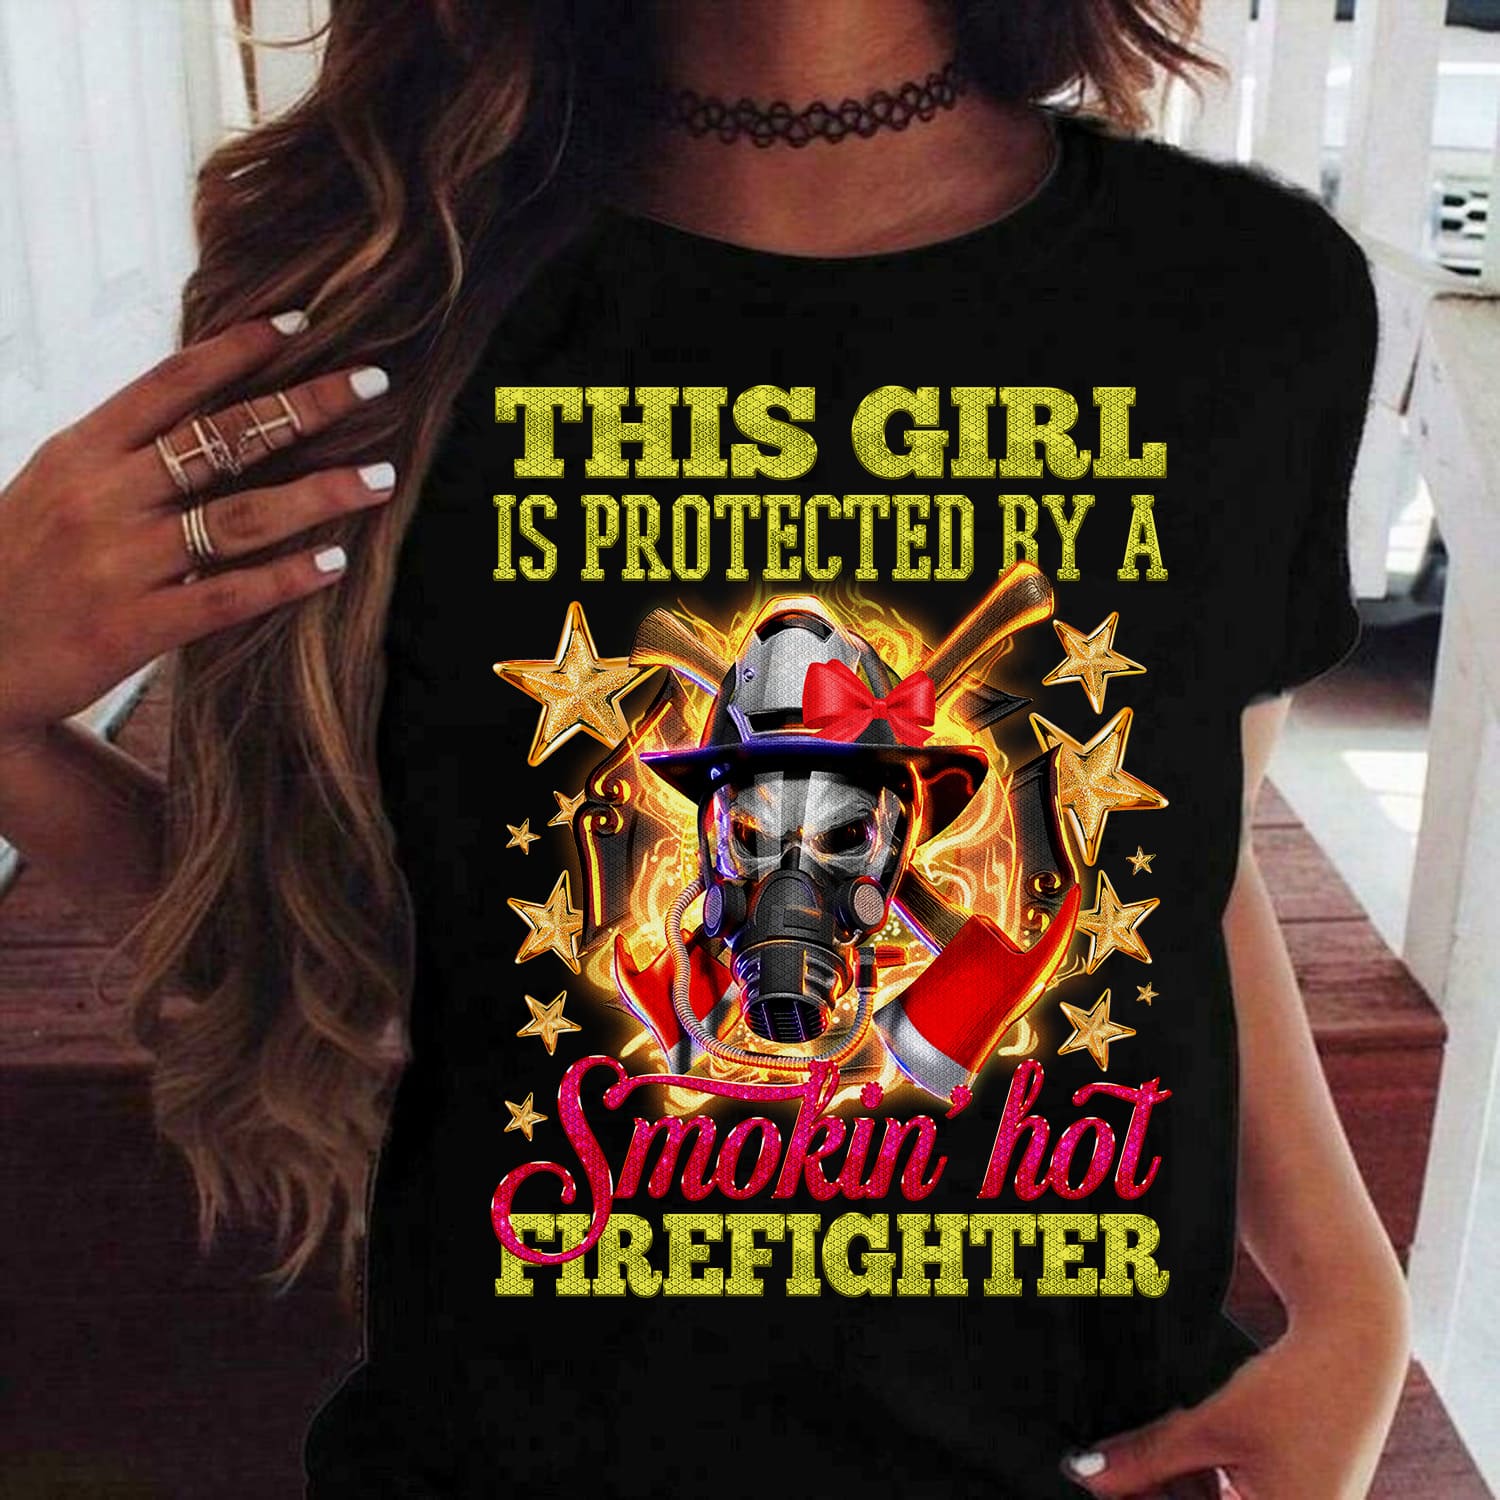 Firefighter Skull Girl - This girl is protected by a smokin' hot firefighter